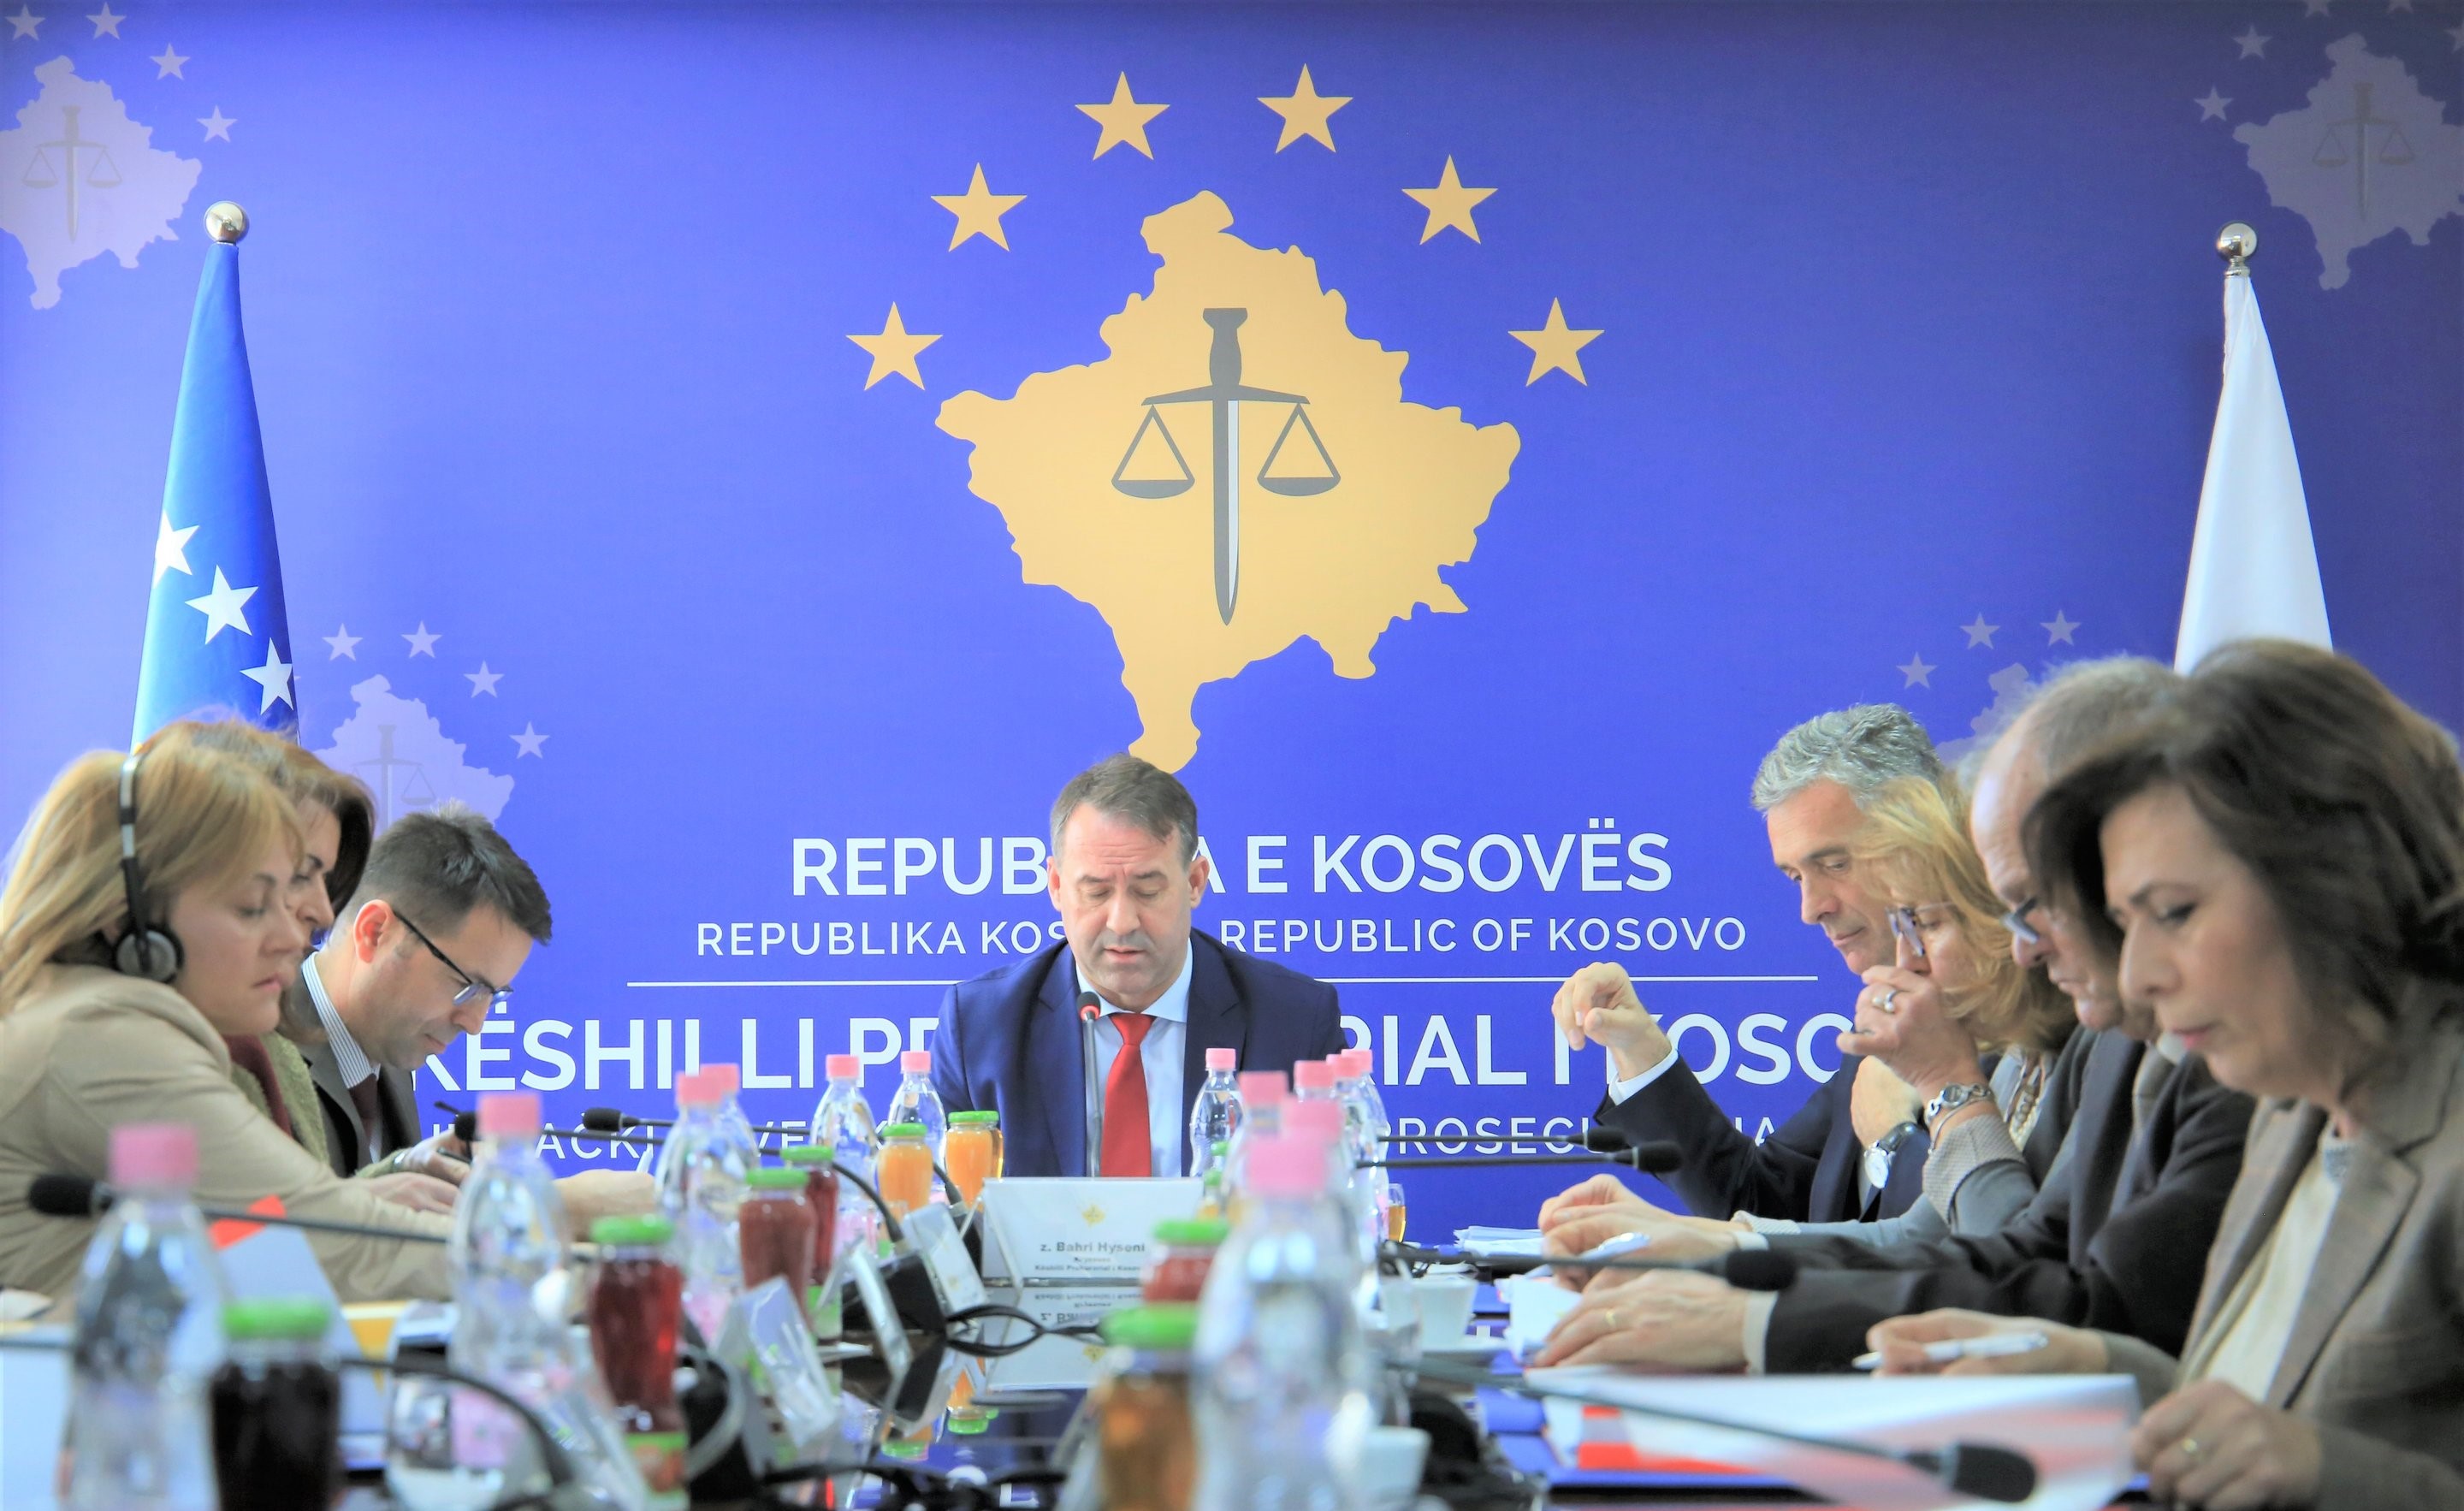 The 178th meeting of the Kosovo Prosecutorial Council is held